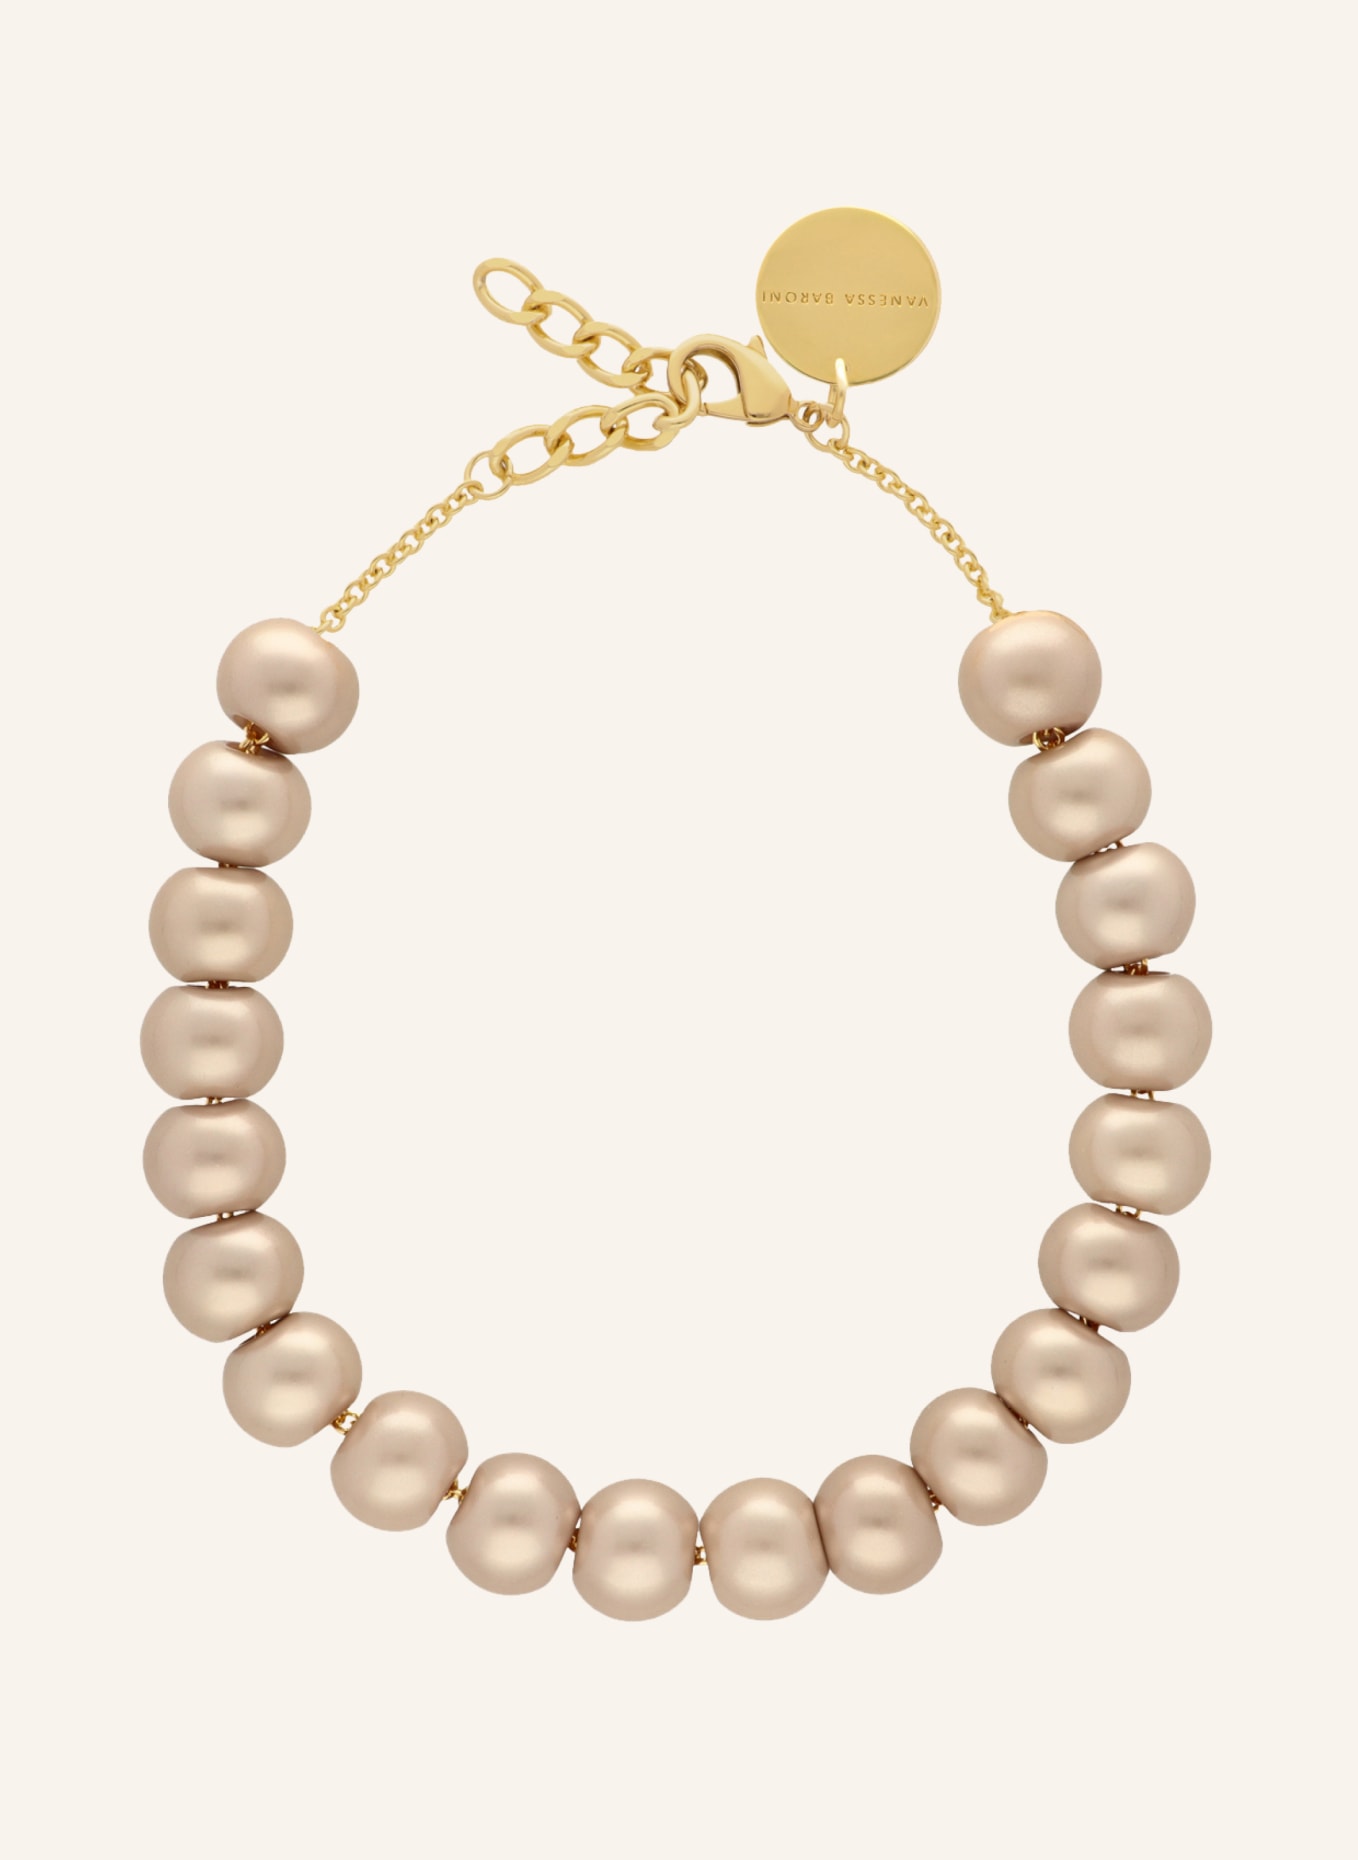 VANESSA BARONI Kette SMALL BEADS NECKLACE CHAMPAGNER PEARL by GLAMBOU, Farbe: GOLD (Bild 1)